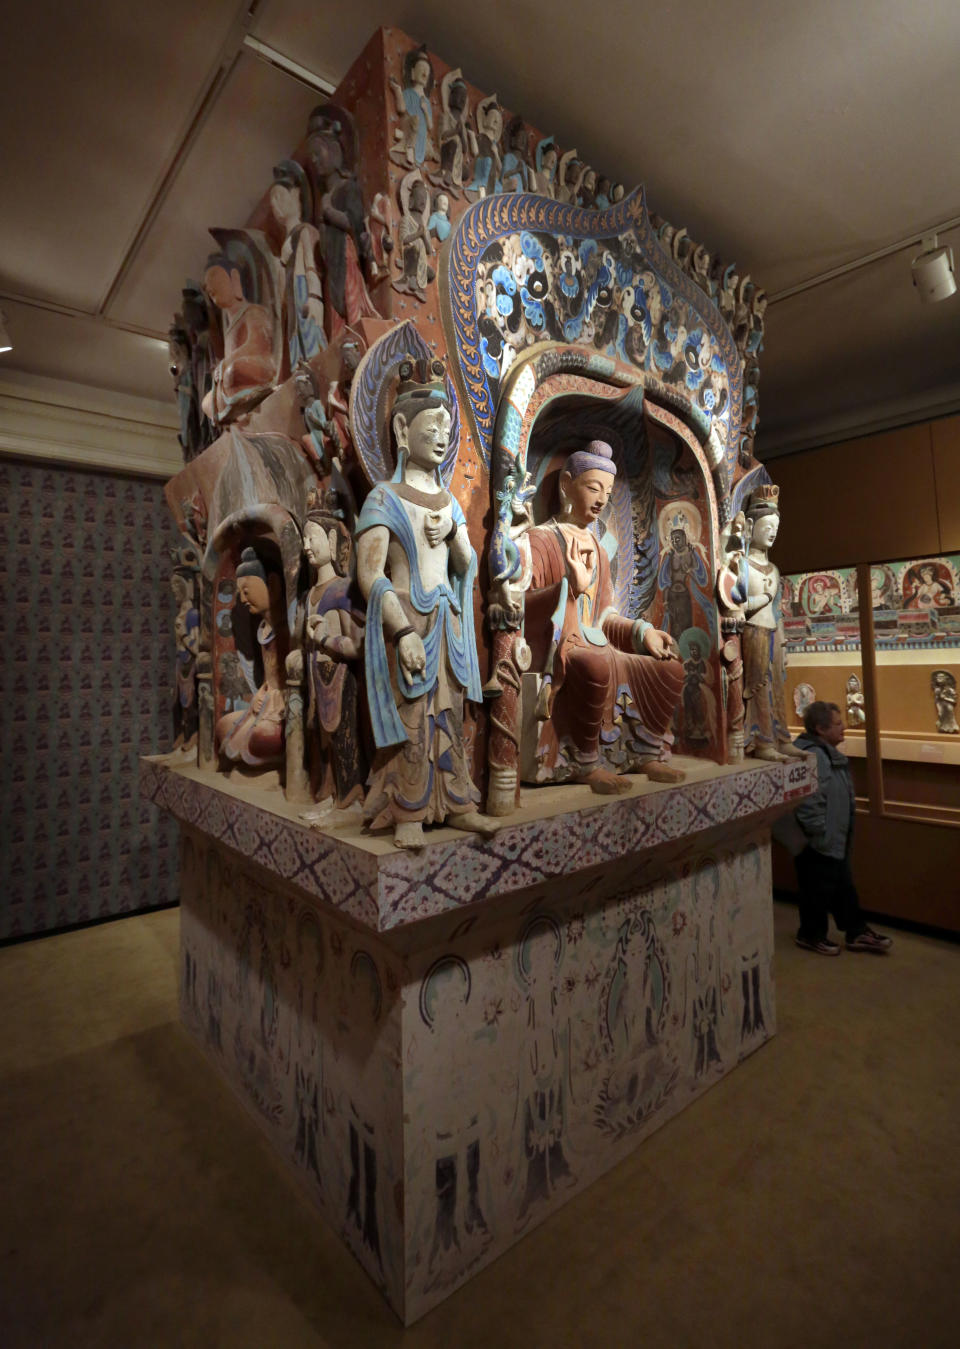 The central pillar of Mogao Cave 432, from the Western Wei Dynasty, 535-556 AD, is presented in "Dunhuang: Buddhist Art at the Gateway of the Silk Road," at the China Institute, in New York, Tuesday, April 24, 2013. (AP Photo/Richard Drew)